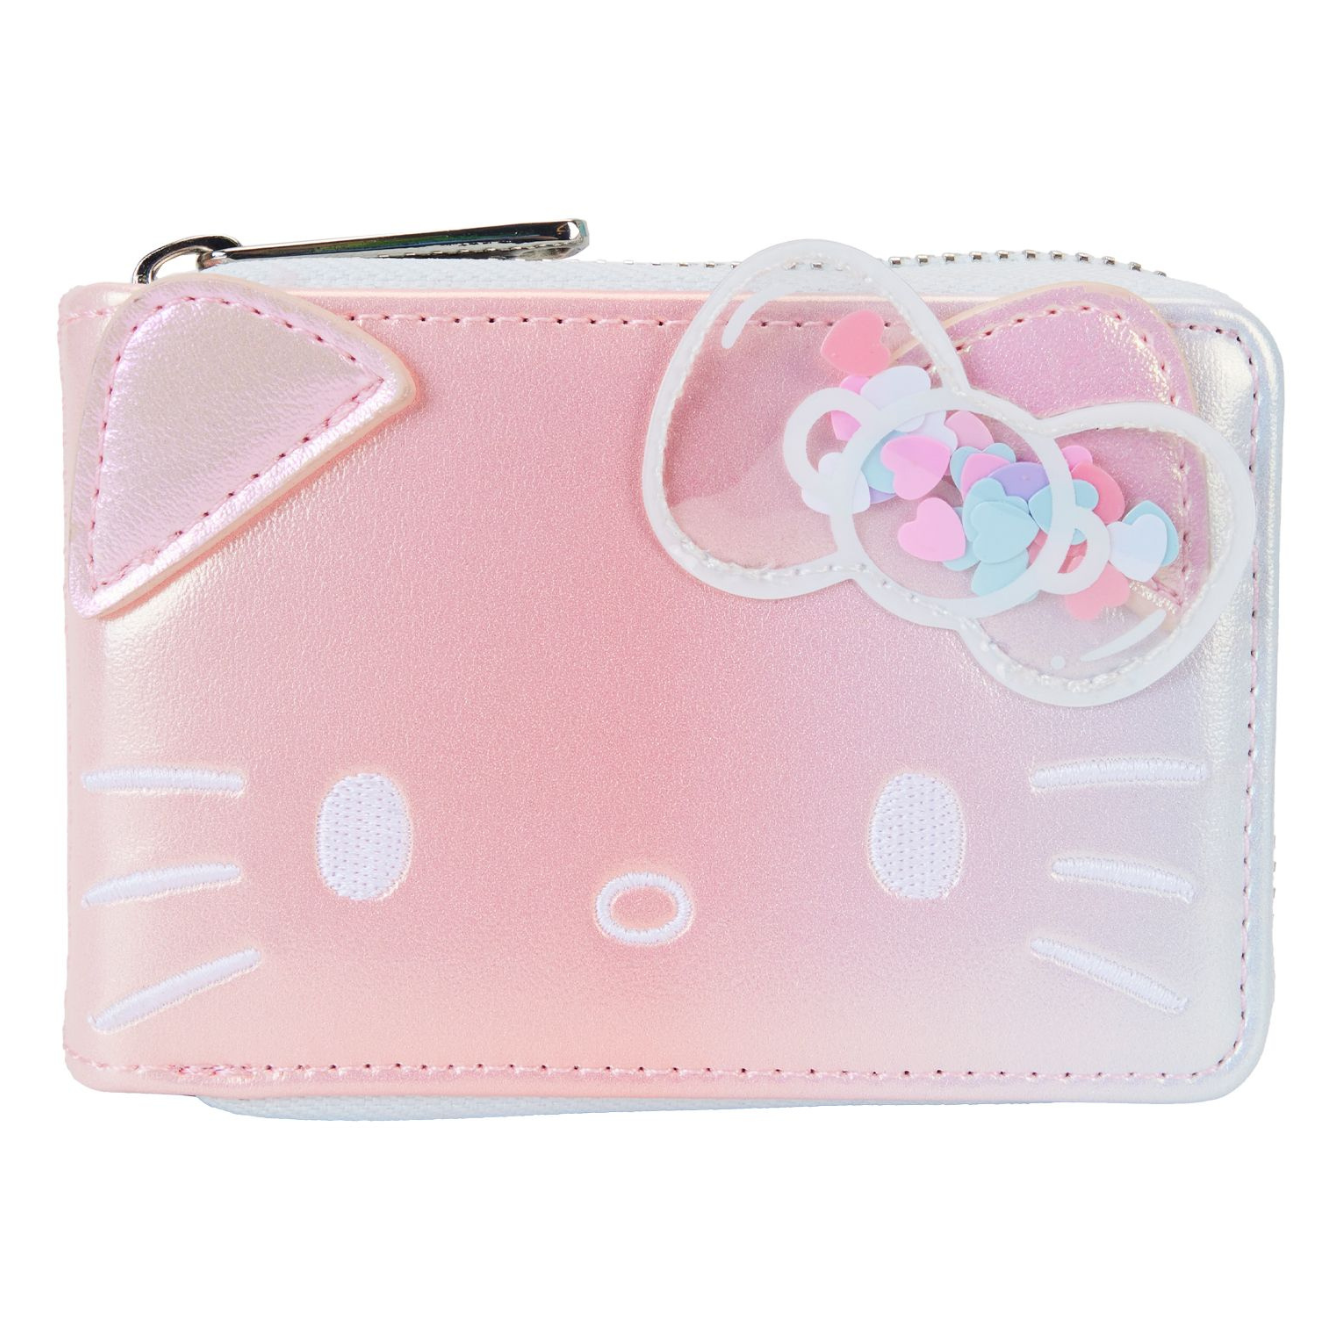 PRE-ORDER Loungefly Hello Kitty 50TH Anniversary Clear and Cute Cosplay Wallet